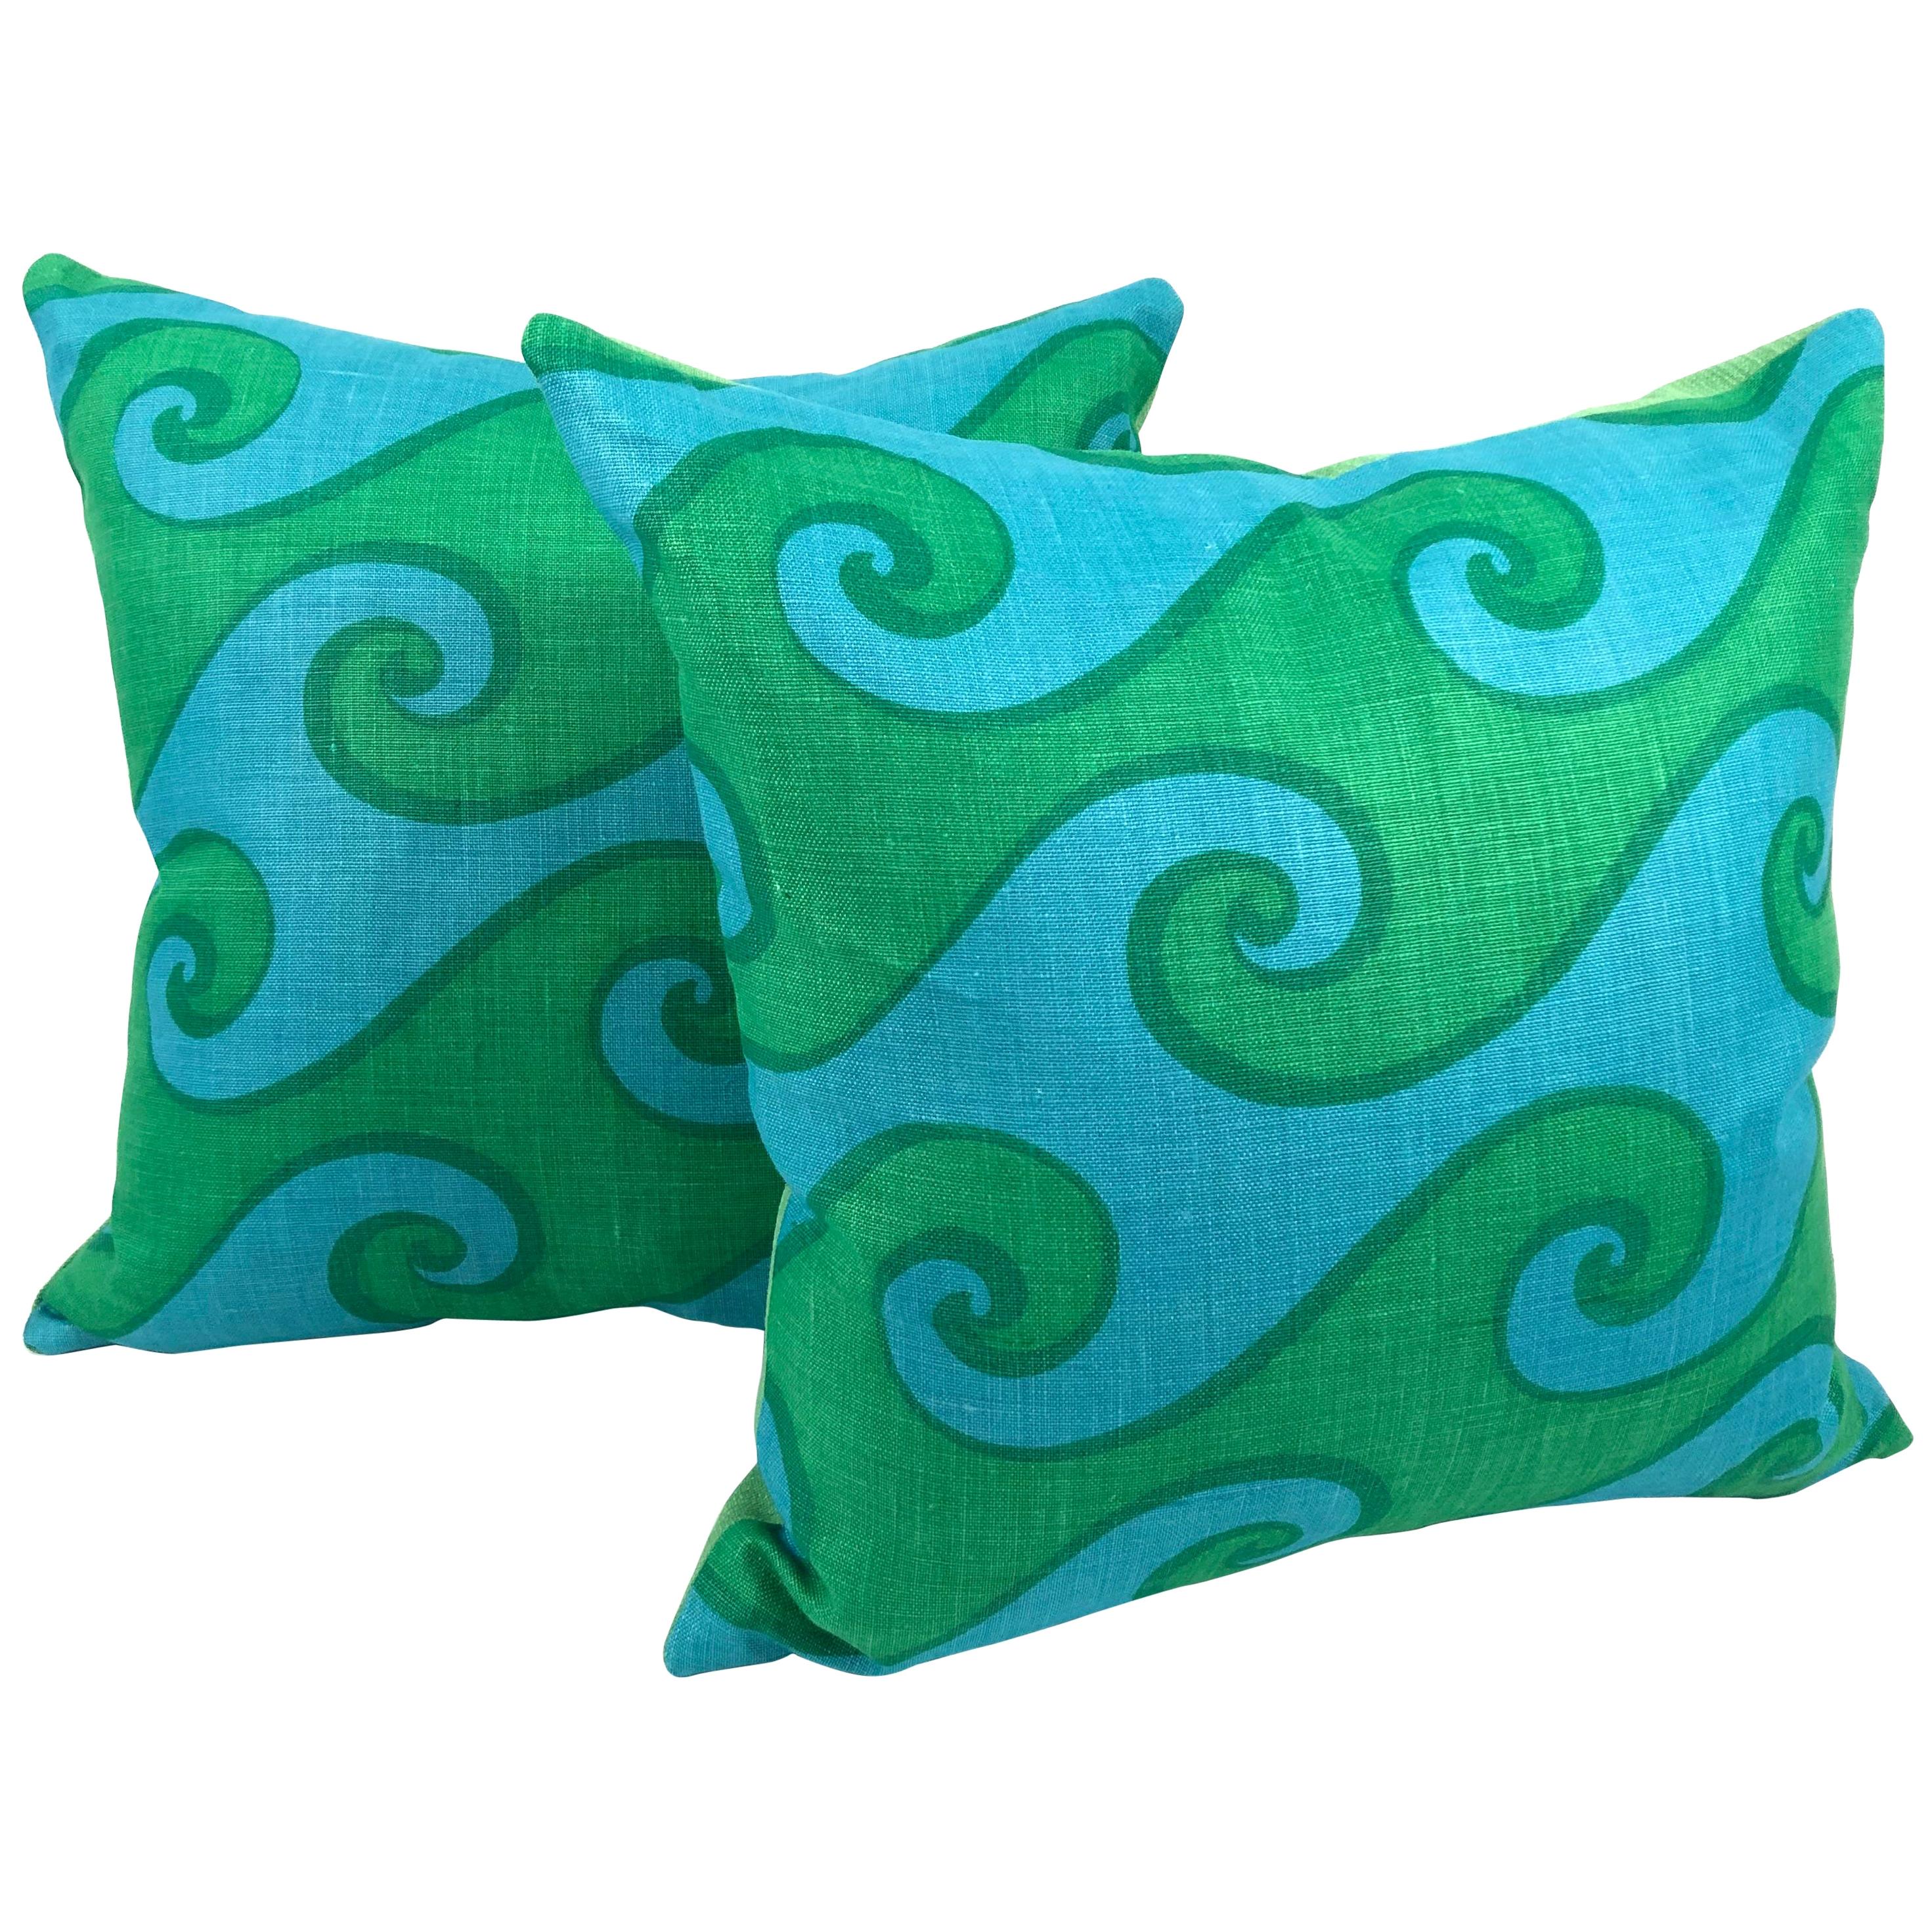 Vintage Blue and Green Sea Scroll Pattern Pillow Hand Printed by Elenhank